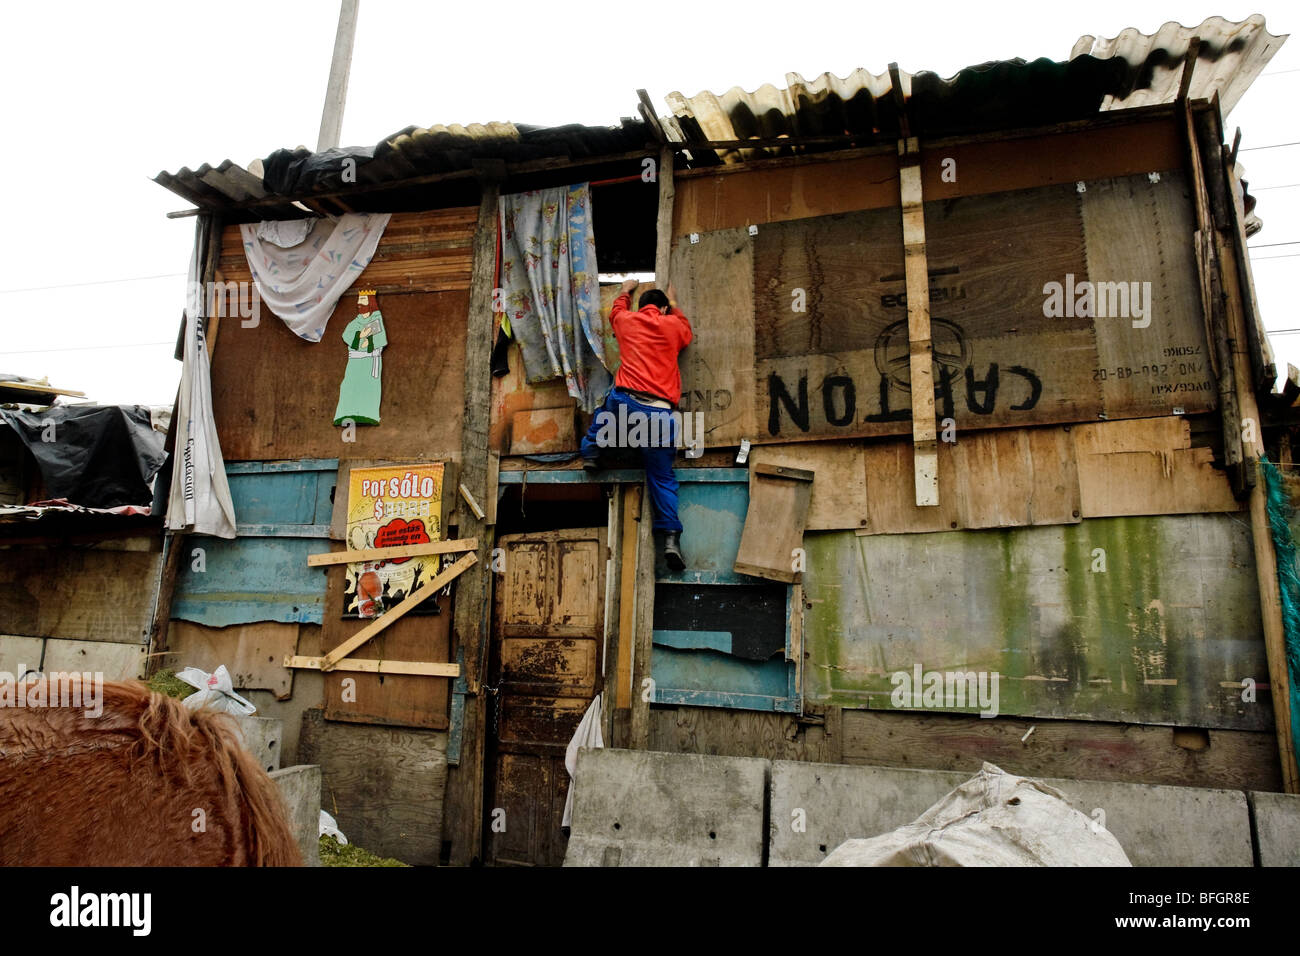 The armed conflict together with lack of social network caused appearence of illegal invasion slums in urban zones in Colombia. Stock Photo